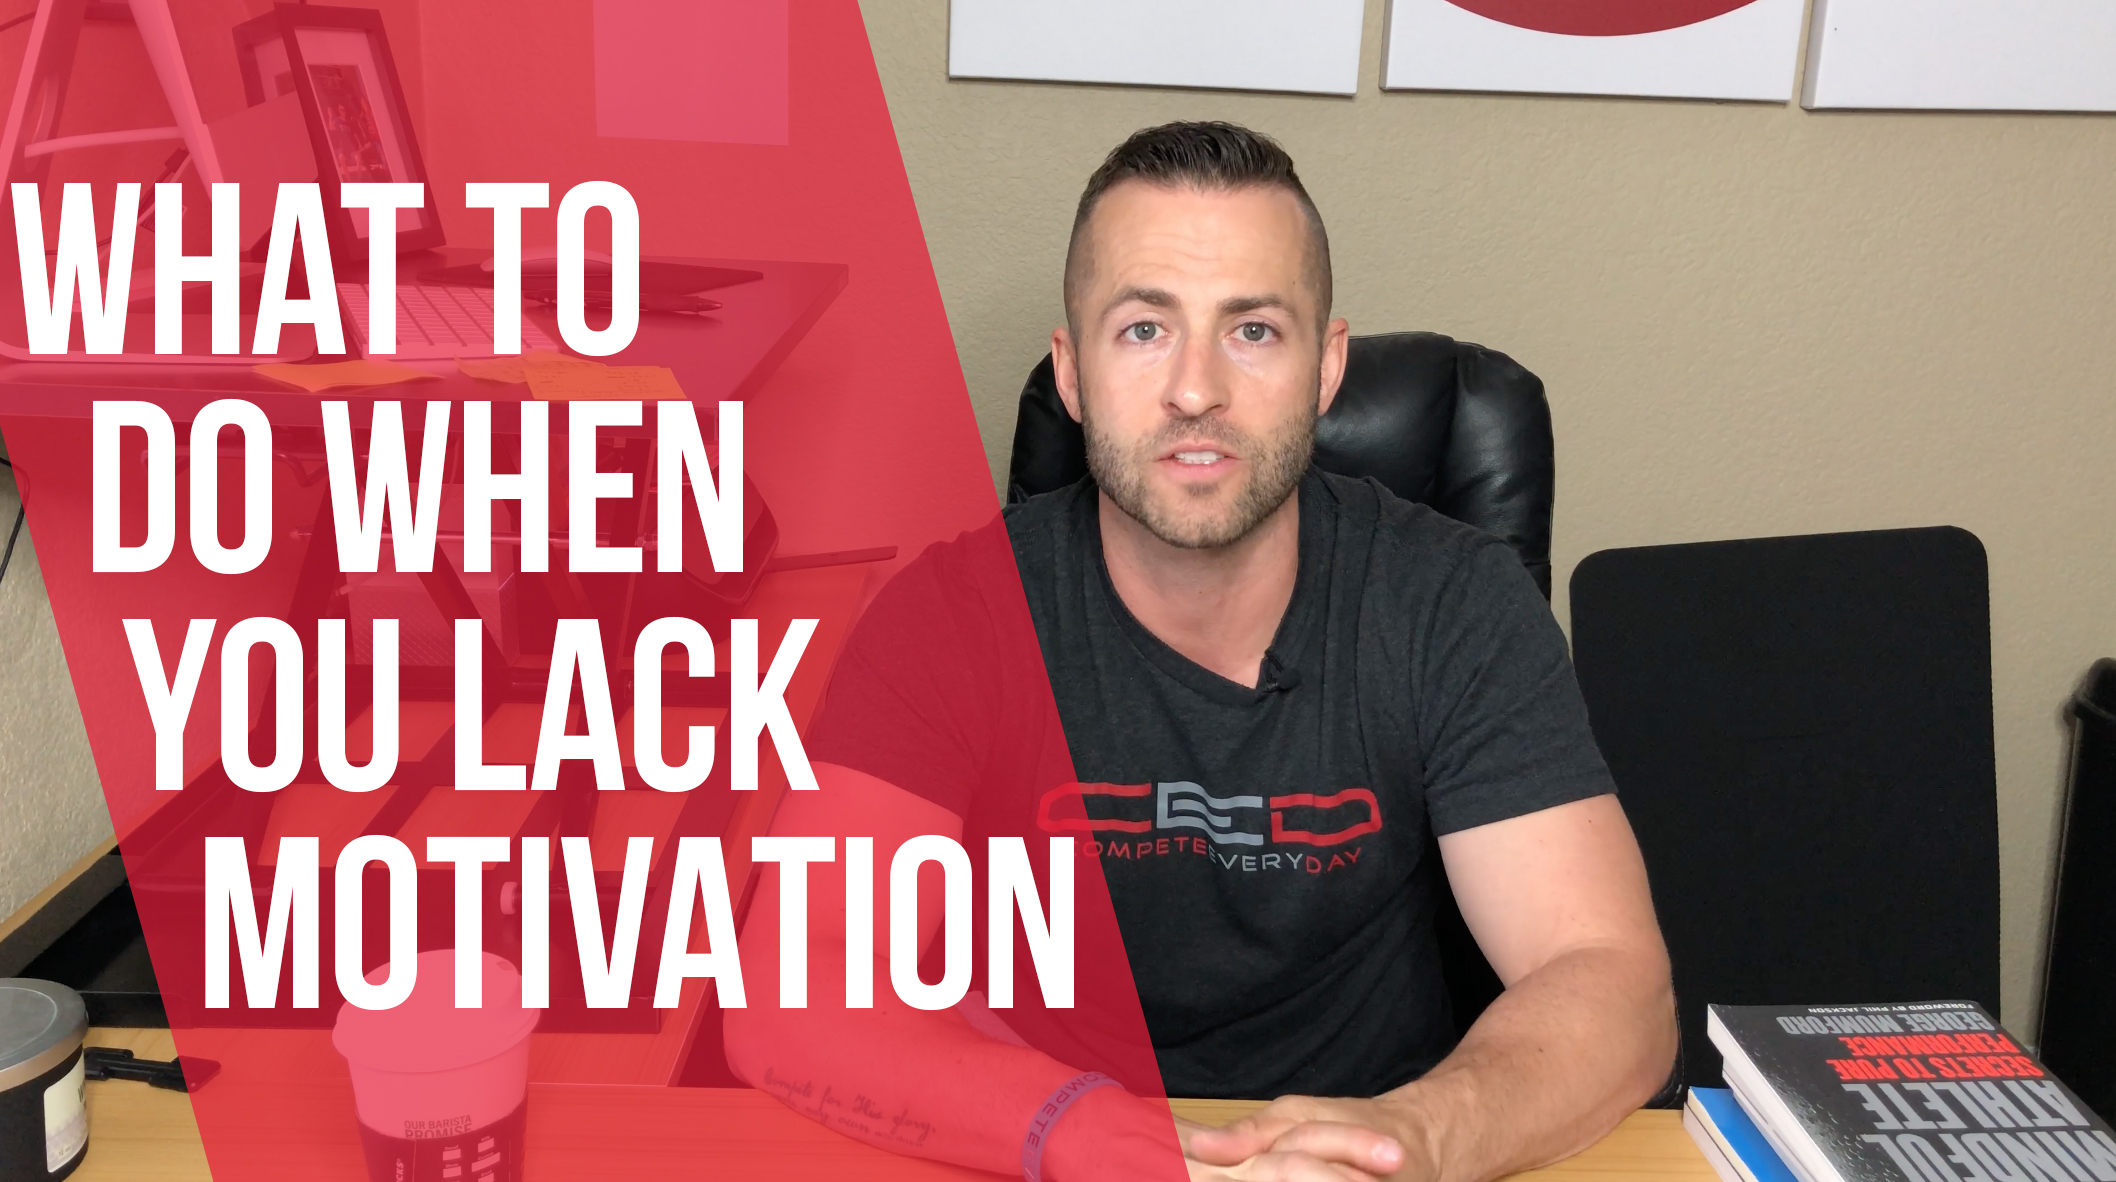 What to do when you lack motivation